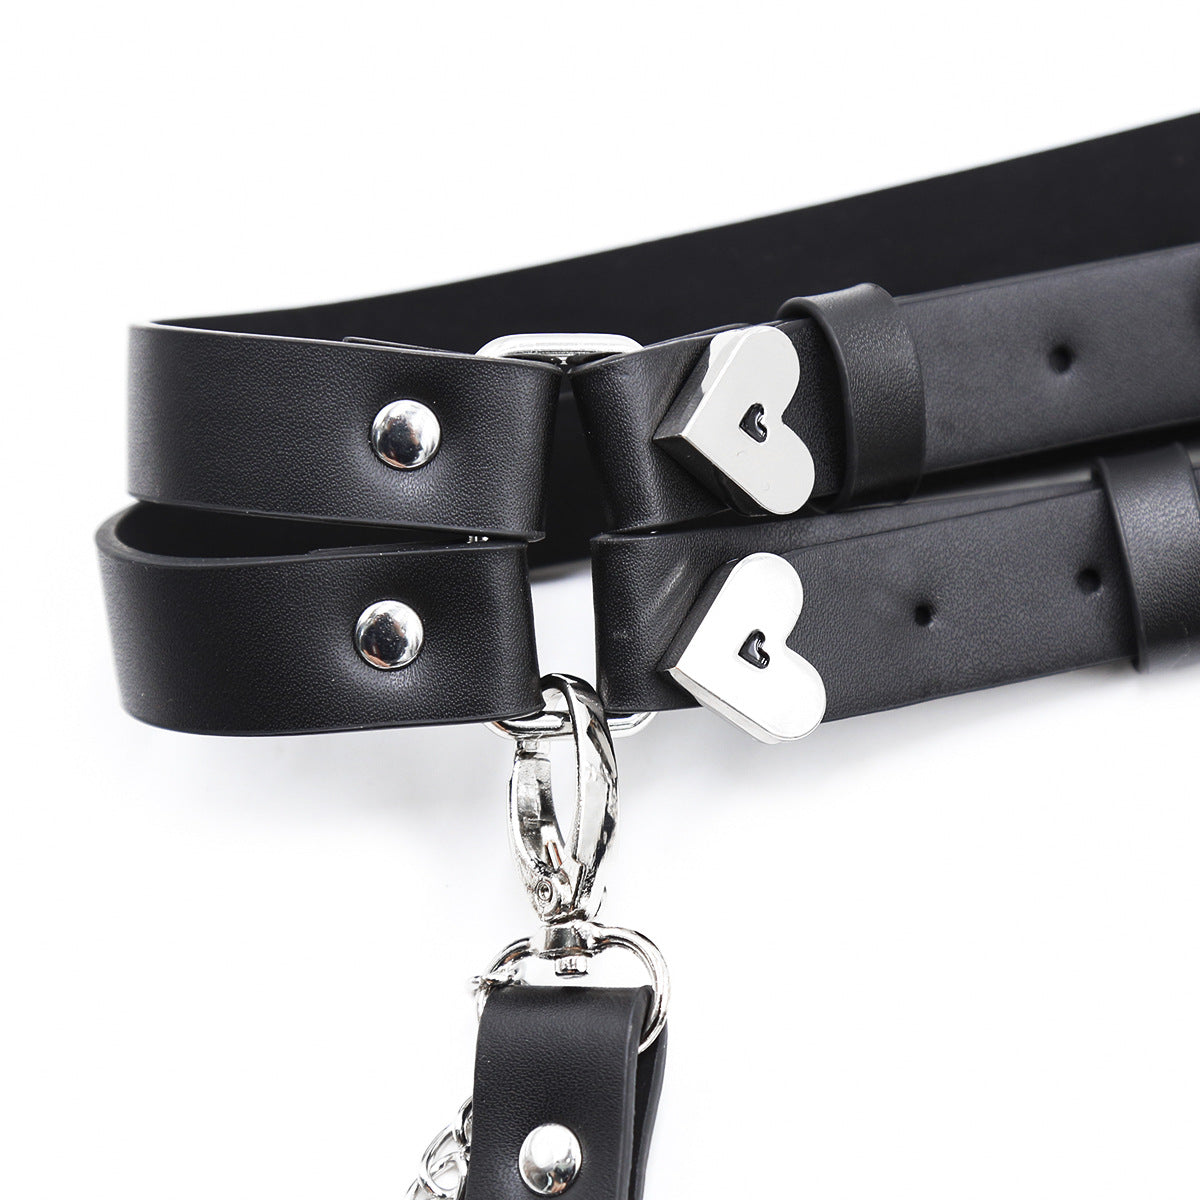 Waist and Buttock Harness